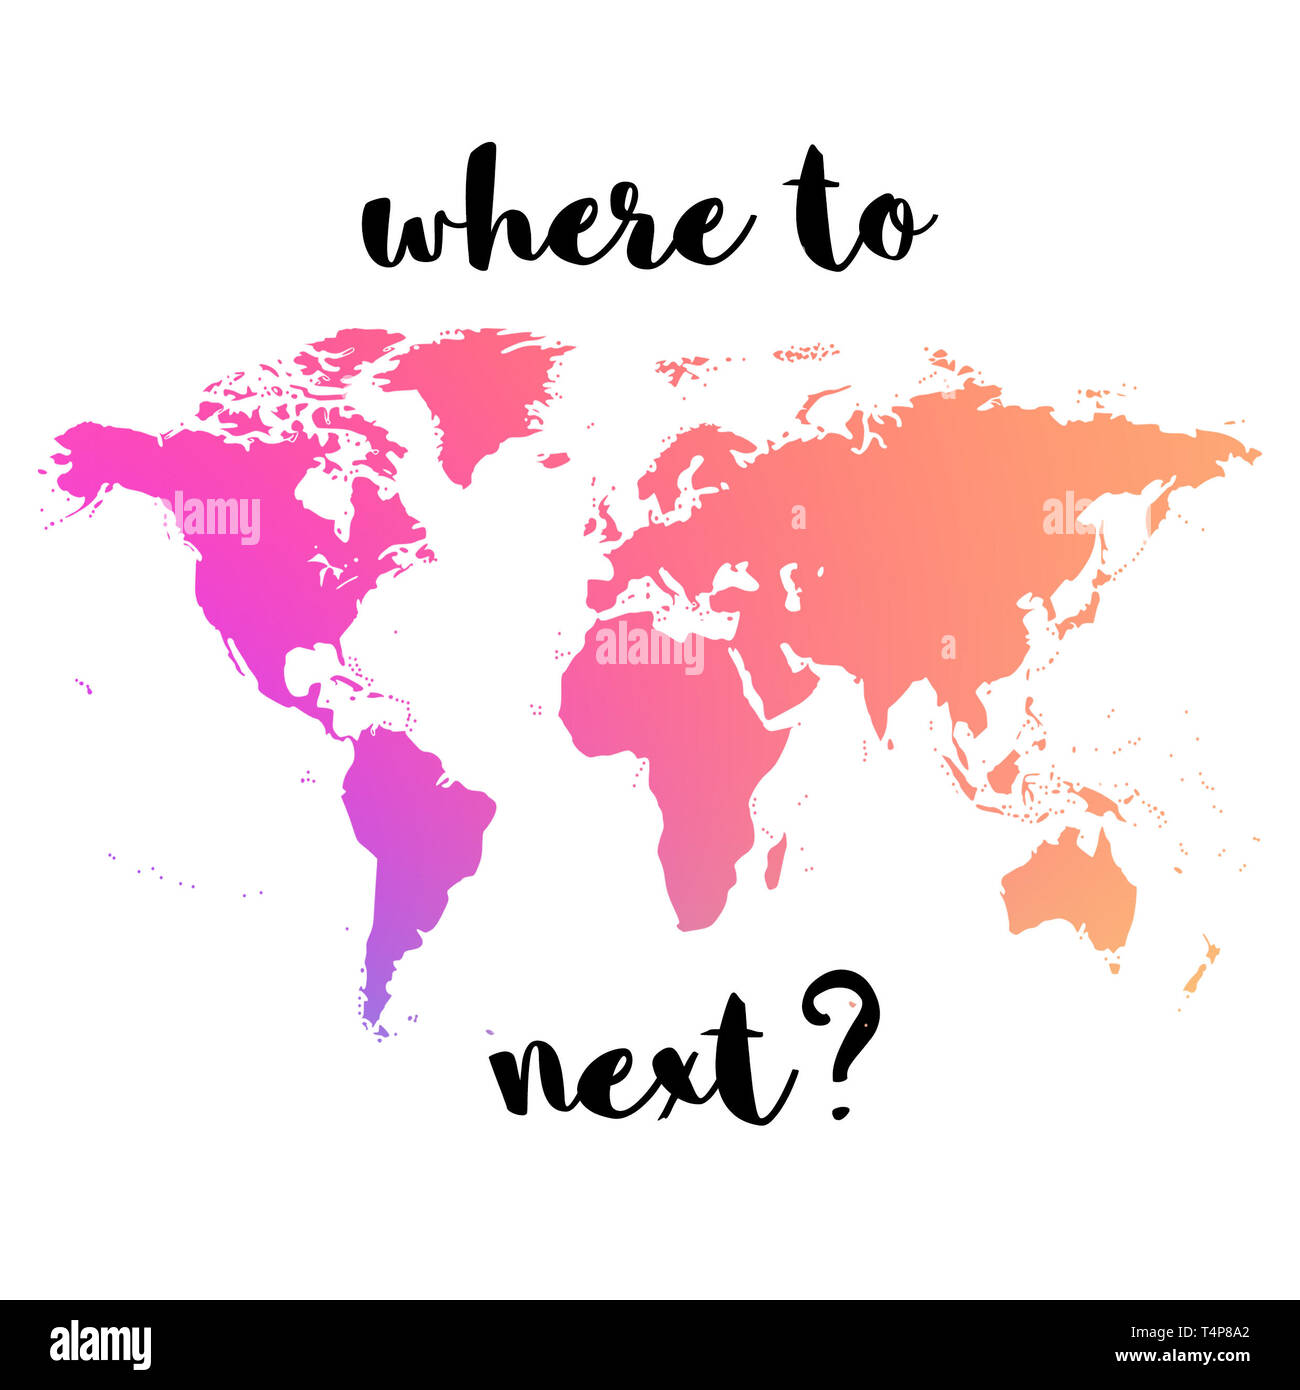 Where to next. Travel inspiration quote with watercolor  world map. Stock Photo